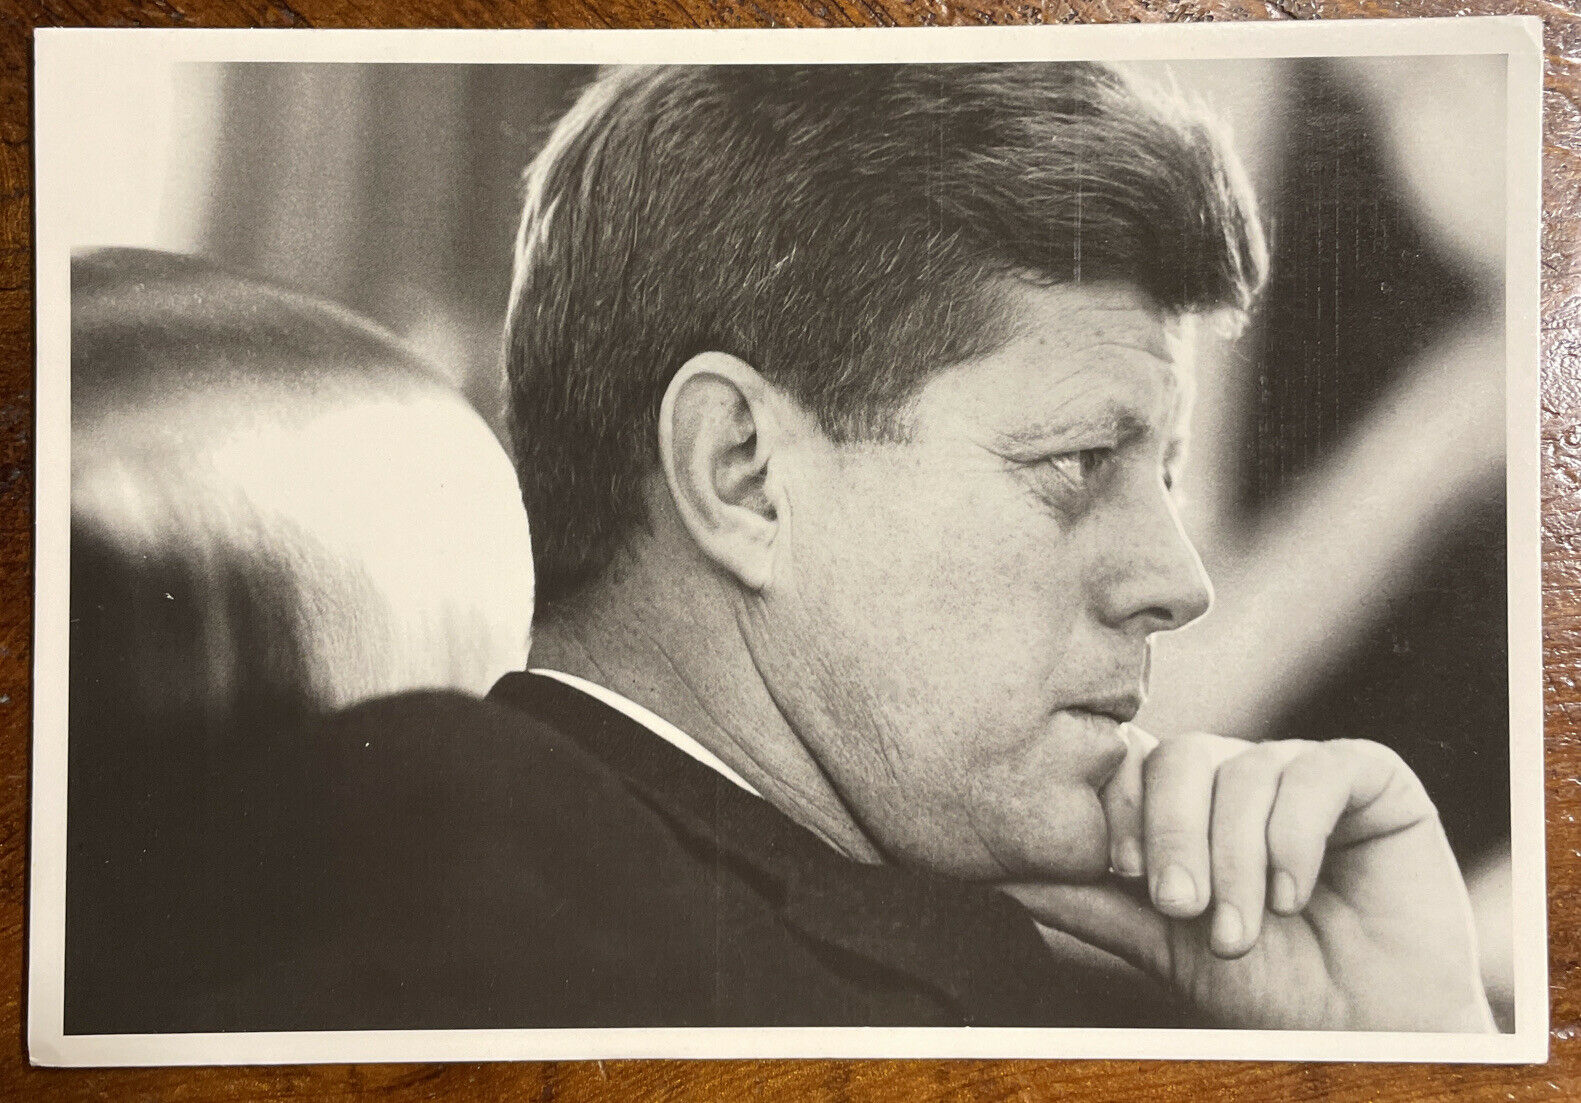 John F Kennedy In The Oval Office Jan 21 1961 Postcard Jacques Lowe Visual Arts